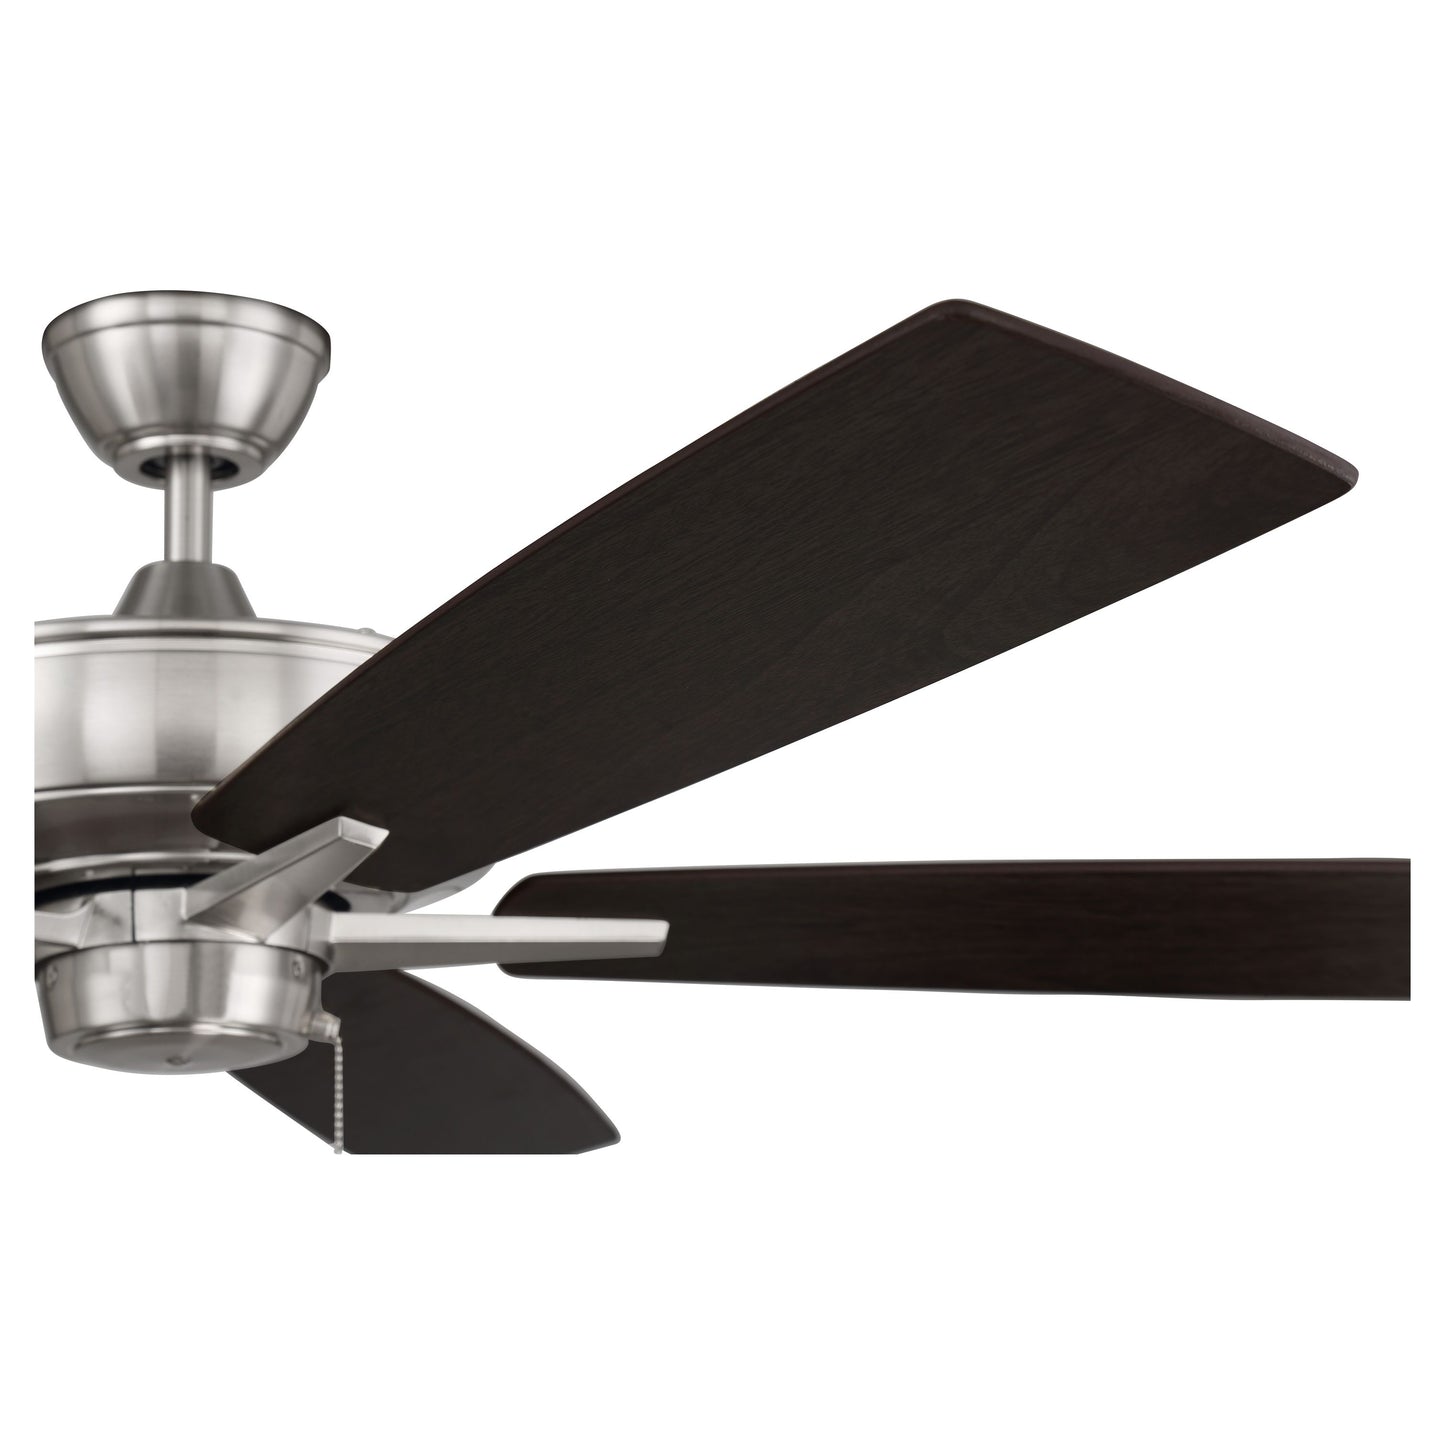 S60BNK5-60DWGWN - Super Pro 60" 5 Blade Ceiling Fan - Pull Chain - Brushed Polished Nickel